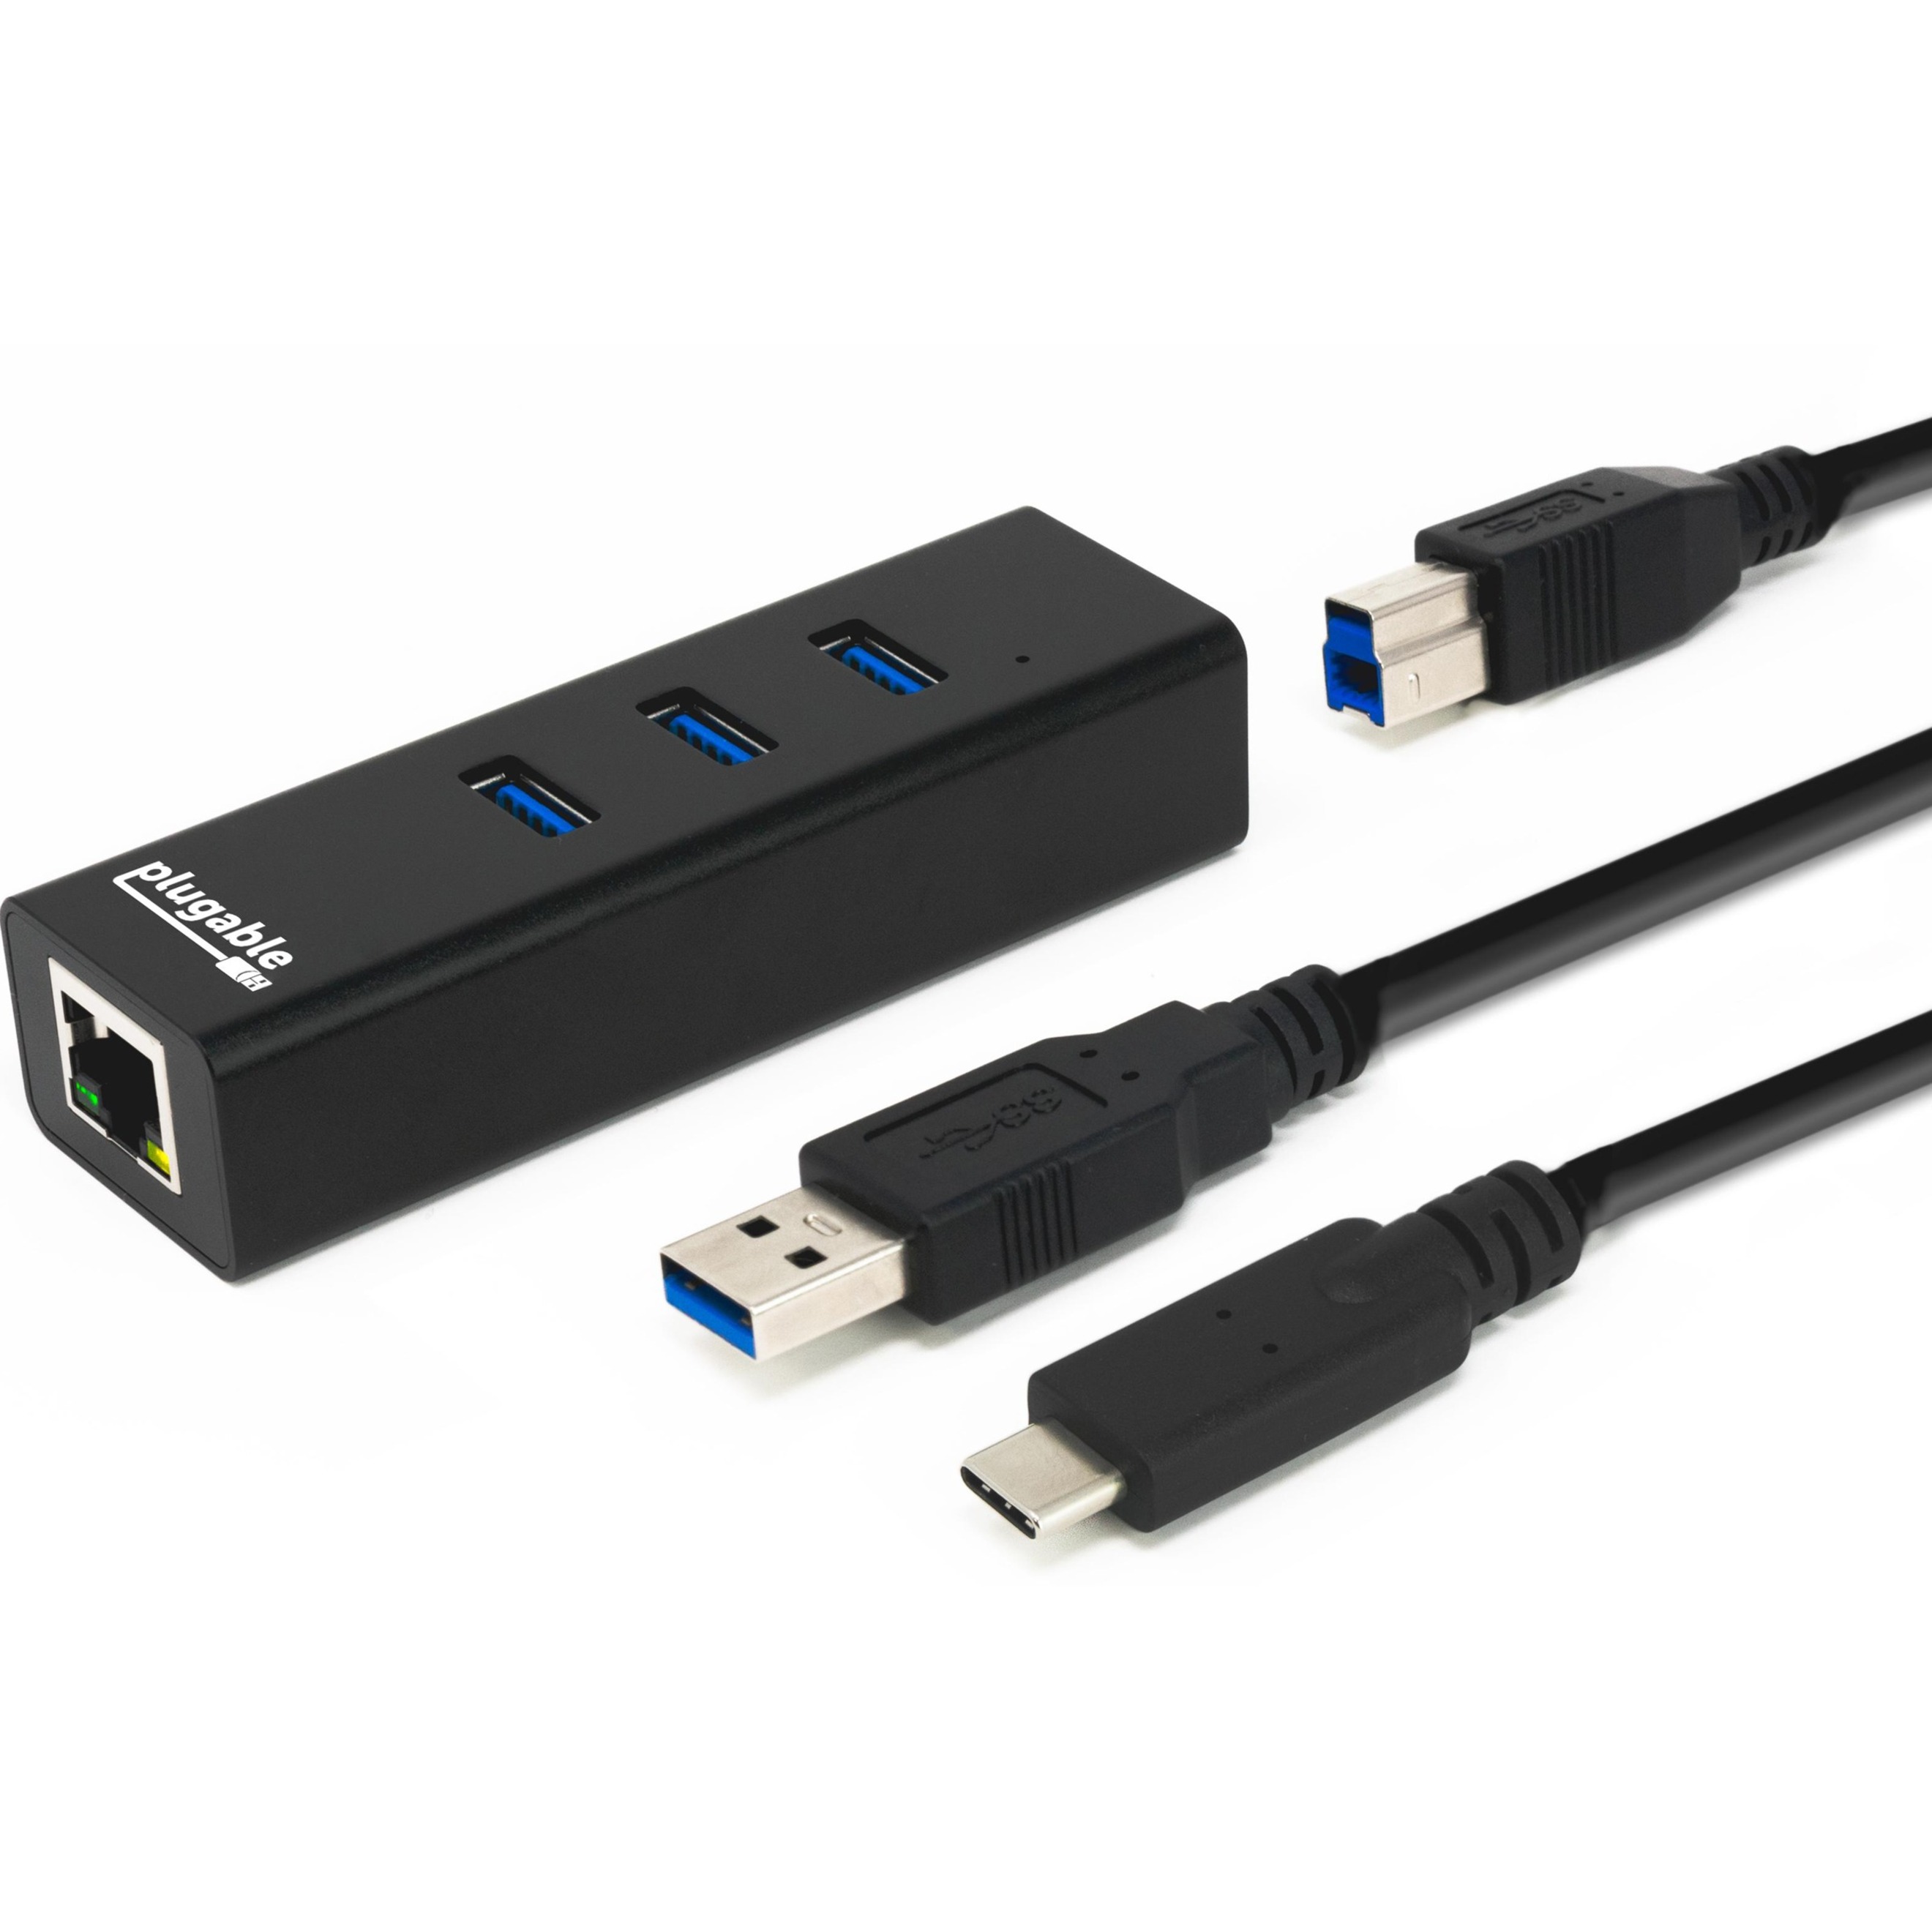 Plugable USB Hub with Ethernet, 3 port USB 3.0 Bus Powered Hub with Gigabit Ethernet Compatible with Windows, MacBook, Linux, Chrome OS, Includes USB C and USB 3.0 Cables - image 1 of 7